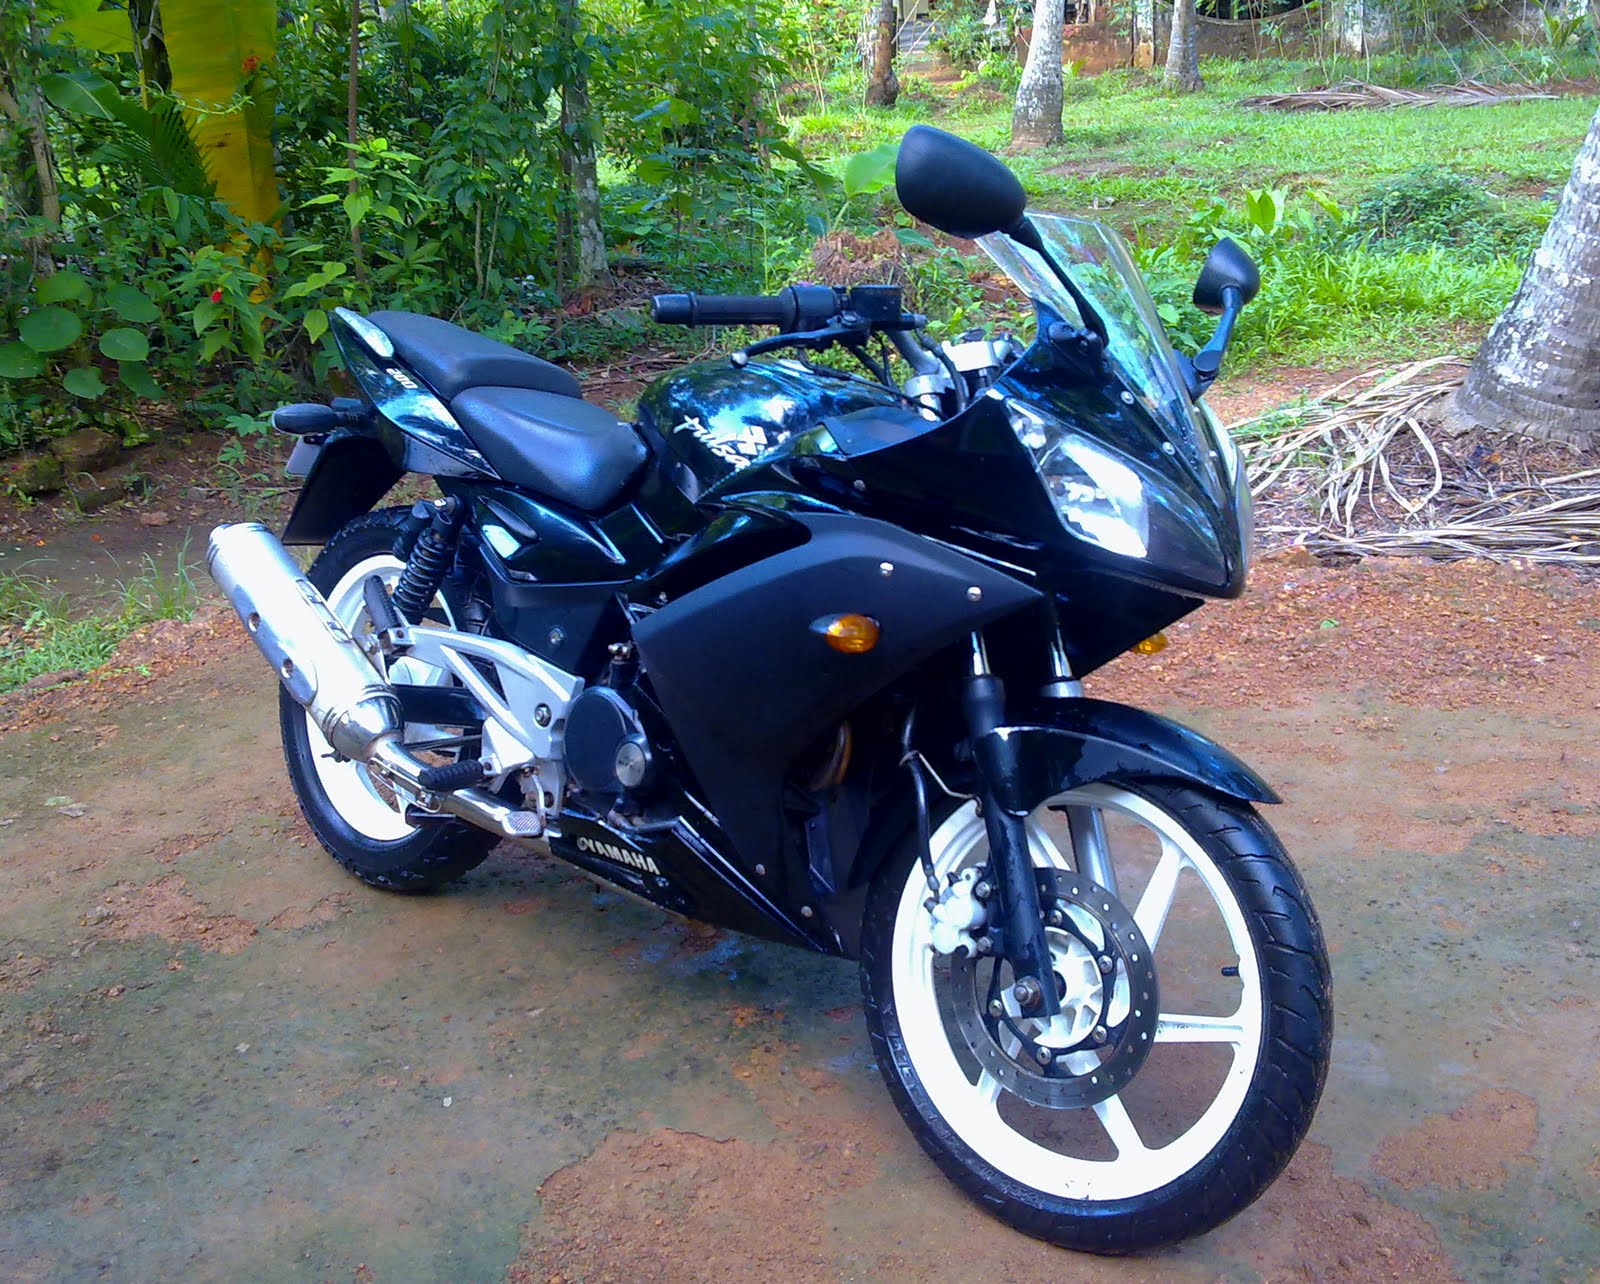 2008 Model Pulsar 200 modified to r15